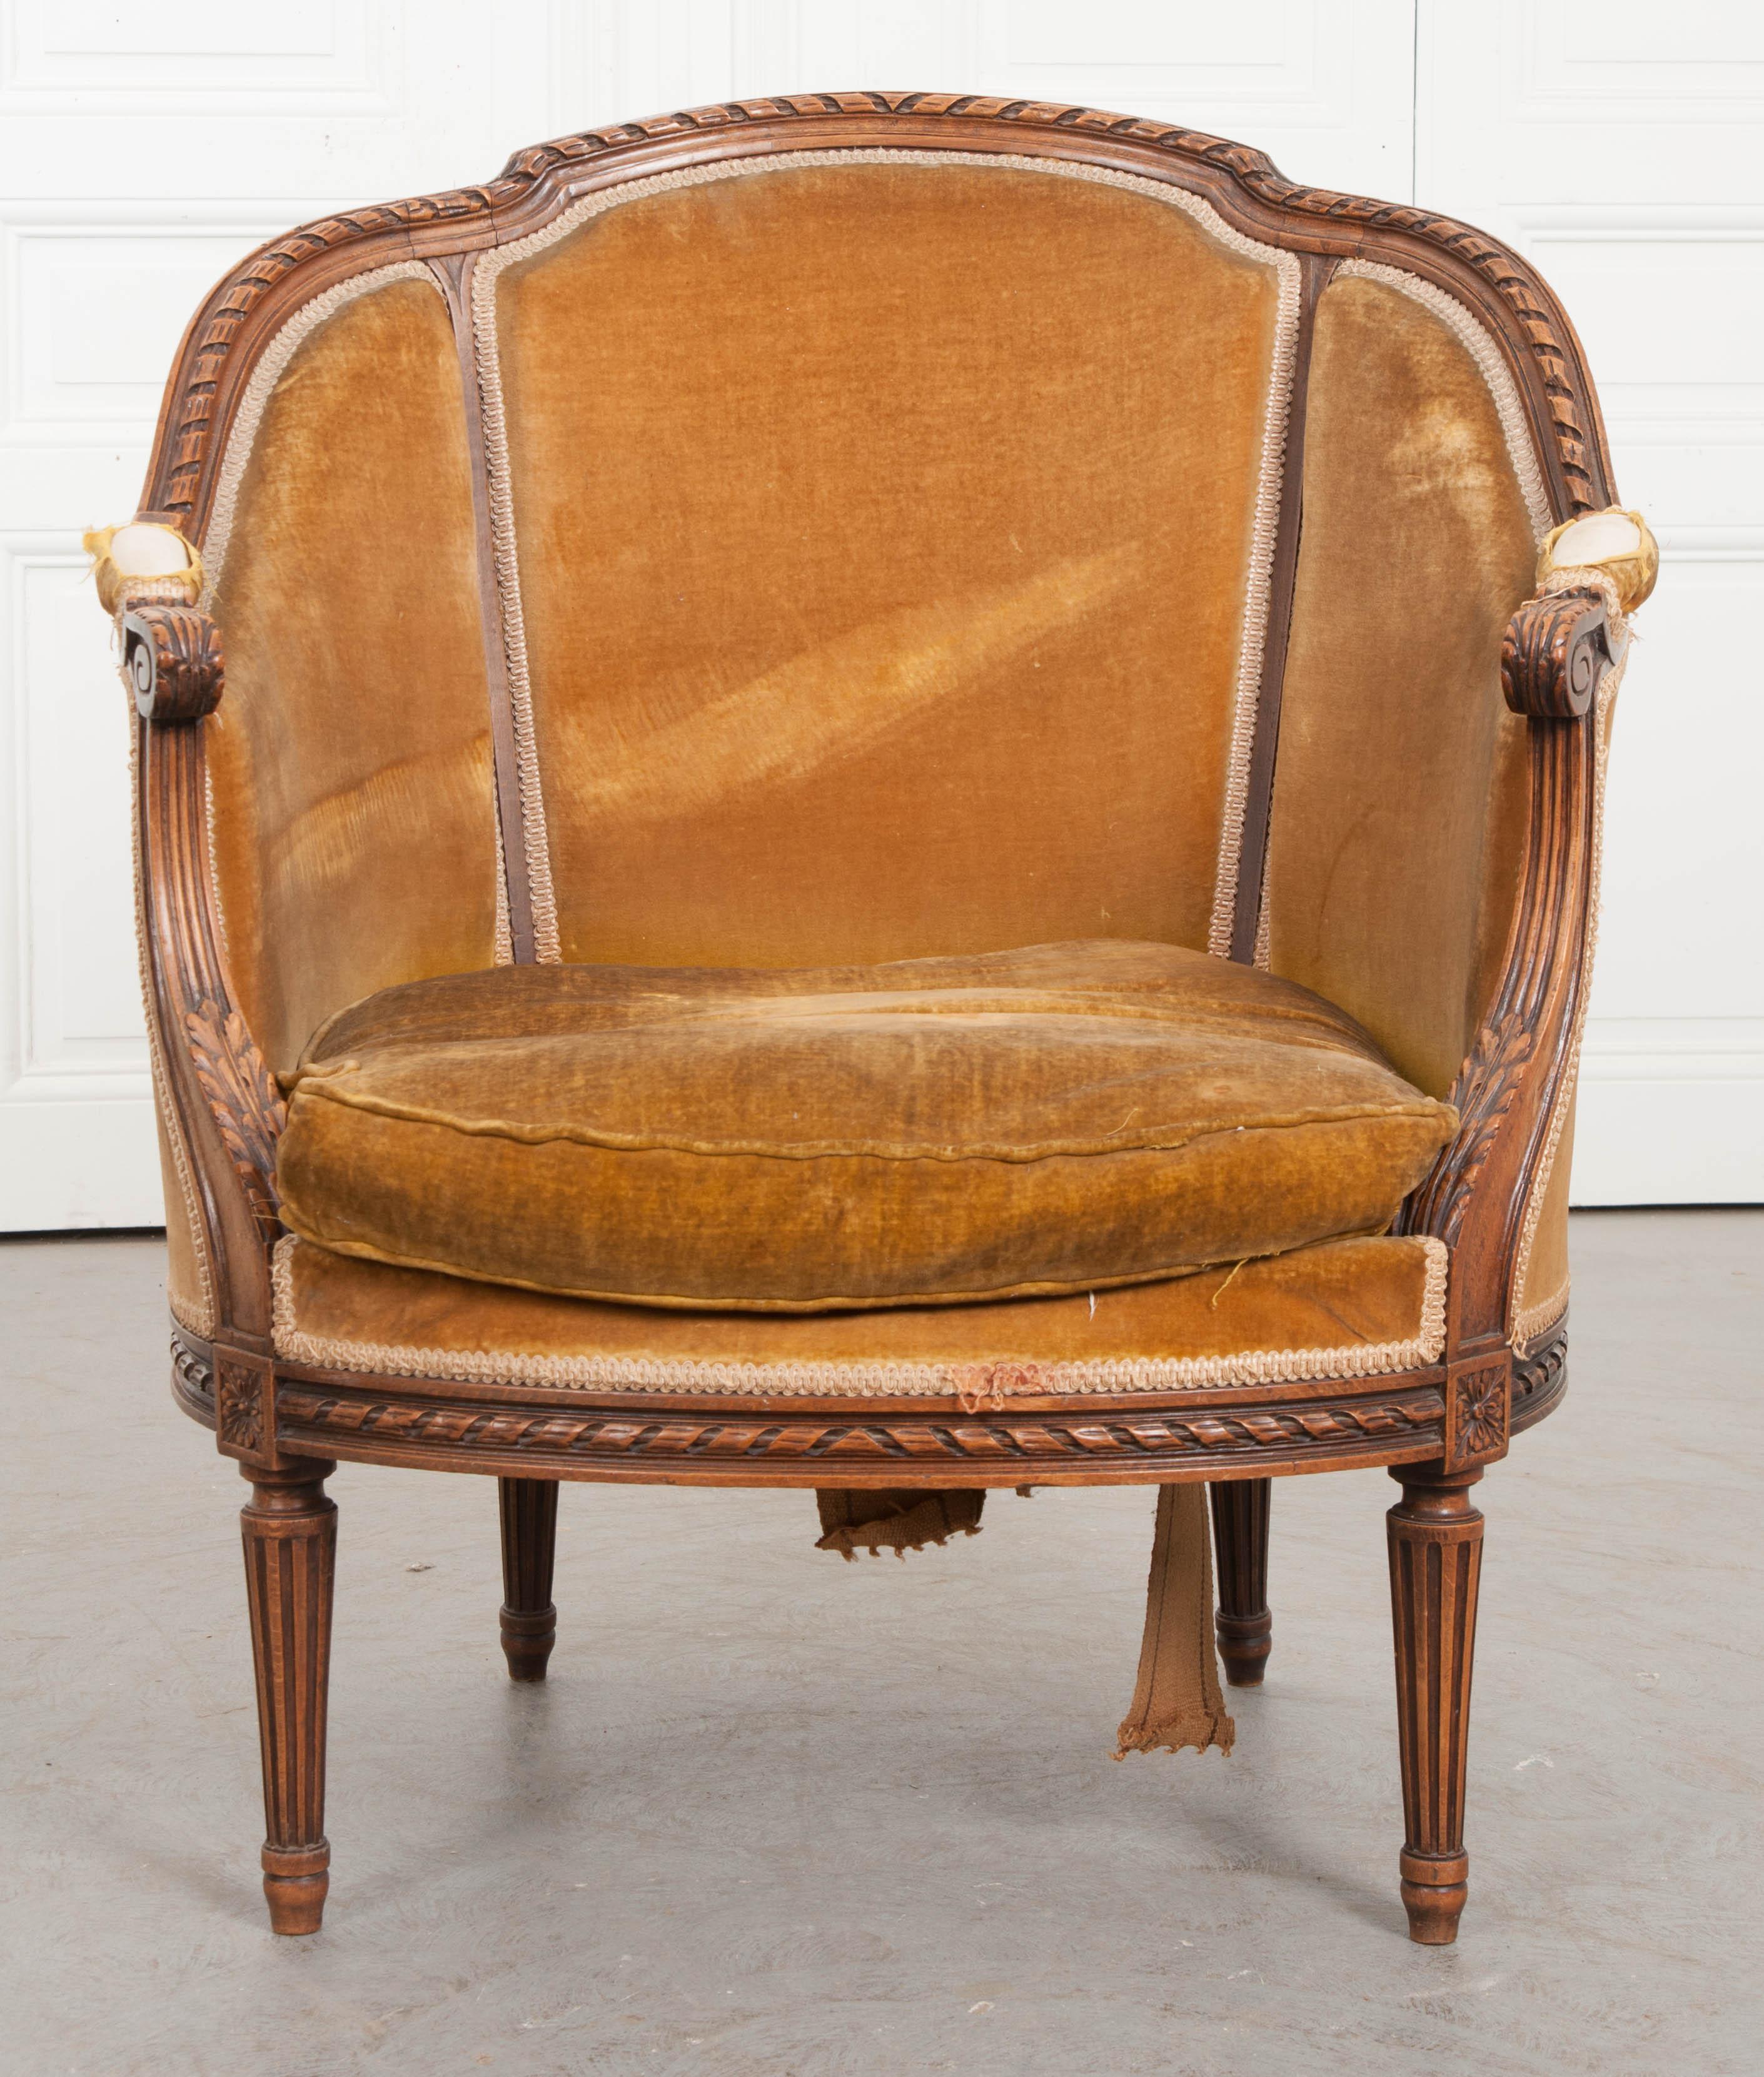 A Regal Louis XVI style bergère from 19th century, France. The bergère has a solid walnut frame that has been totally hand carved. It has a barrel shape, with a curved, shapely top rail. The top-rail, as well as apron, are trimmed in a carved